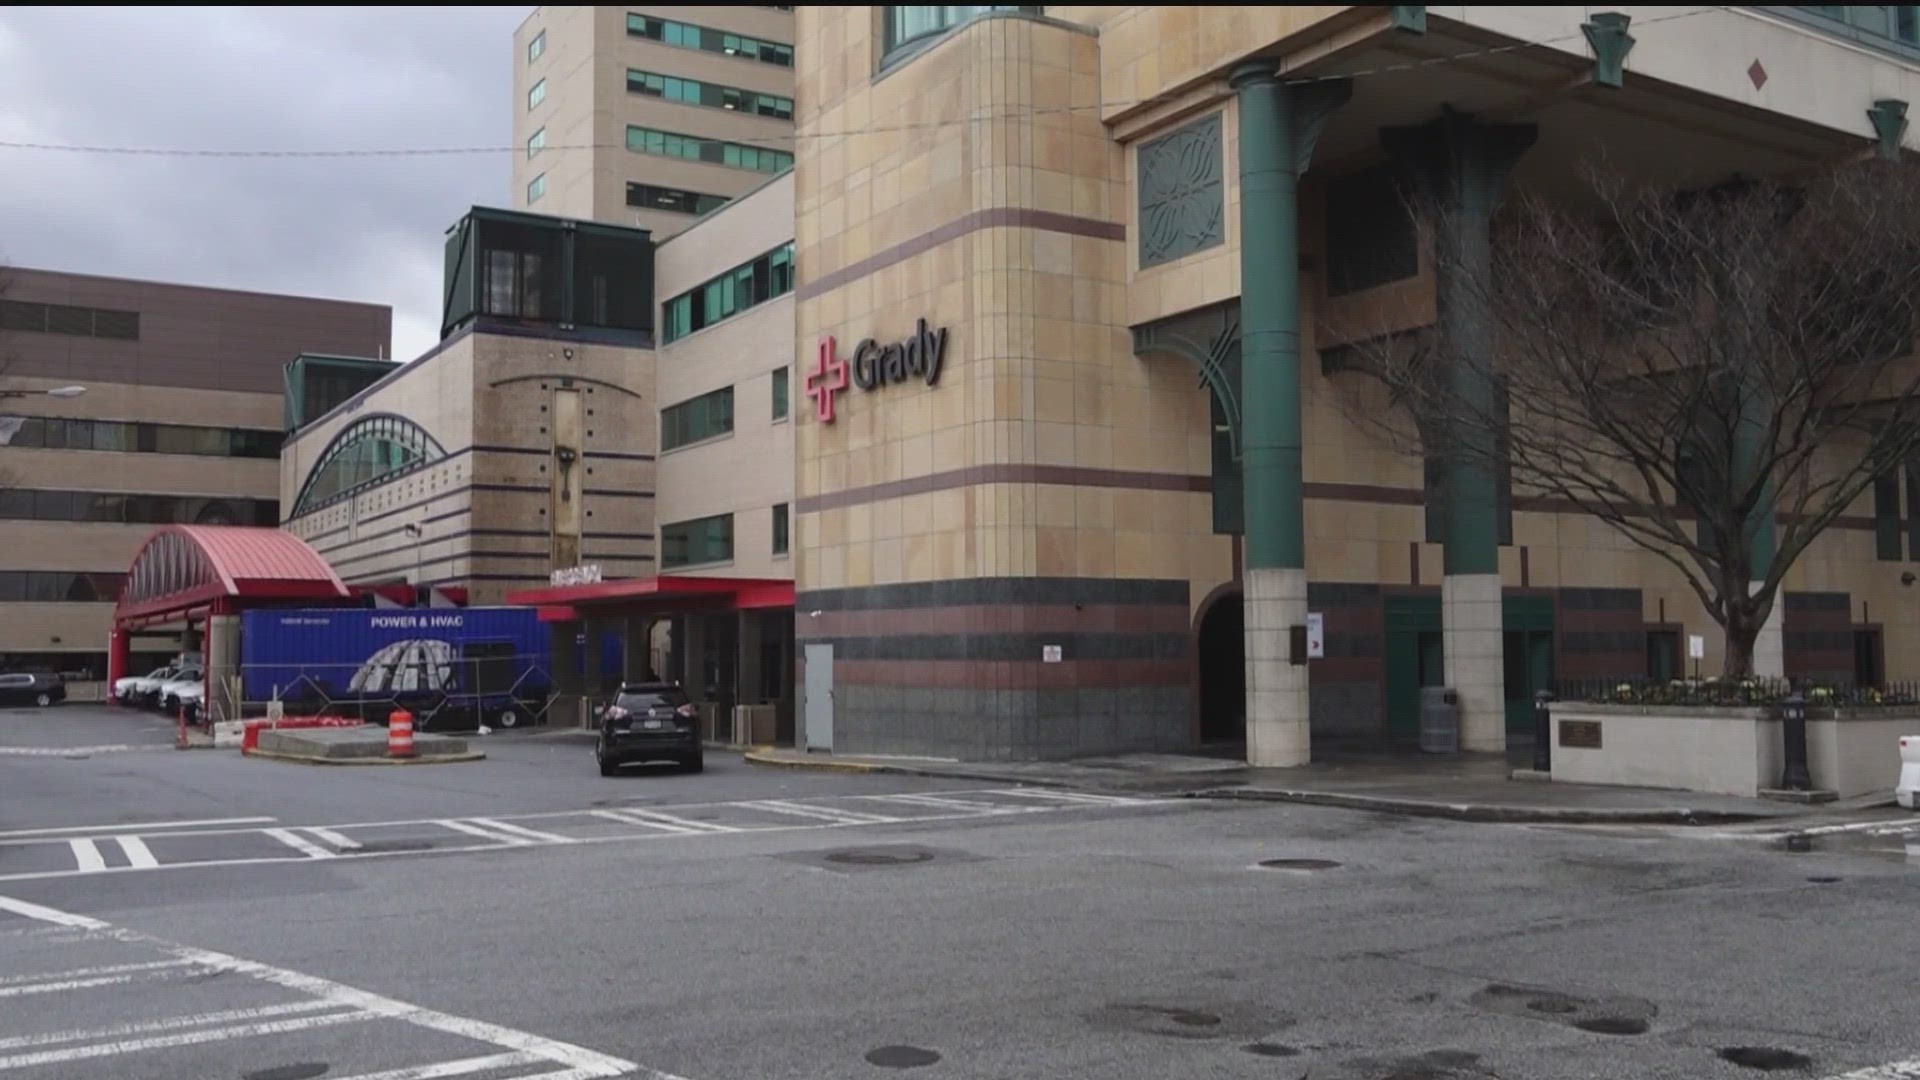 A new agreement is bringing healthcare to more communities across metro Atlanta. Grady Hospital is now working to open new clinics.